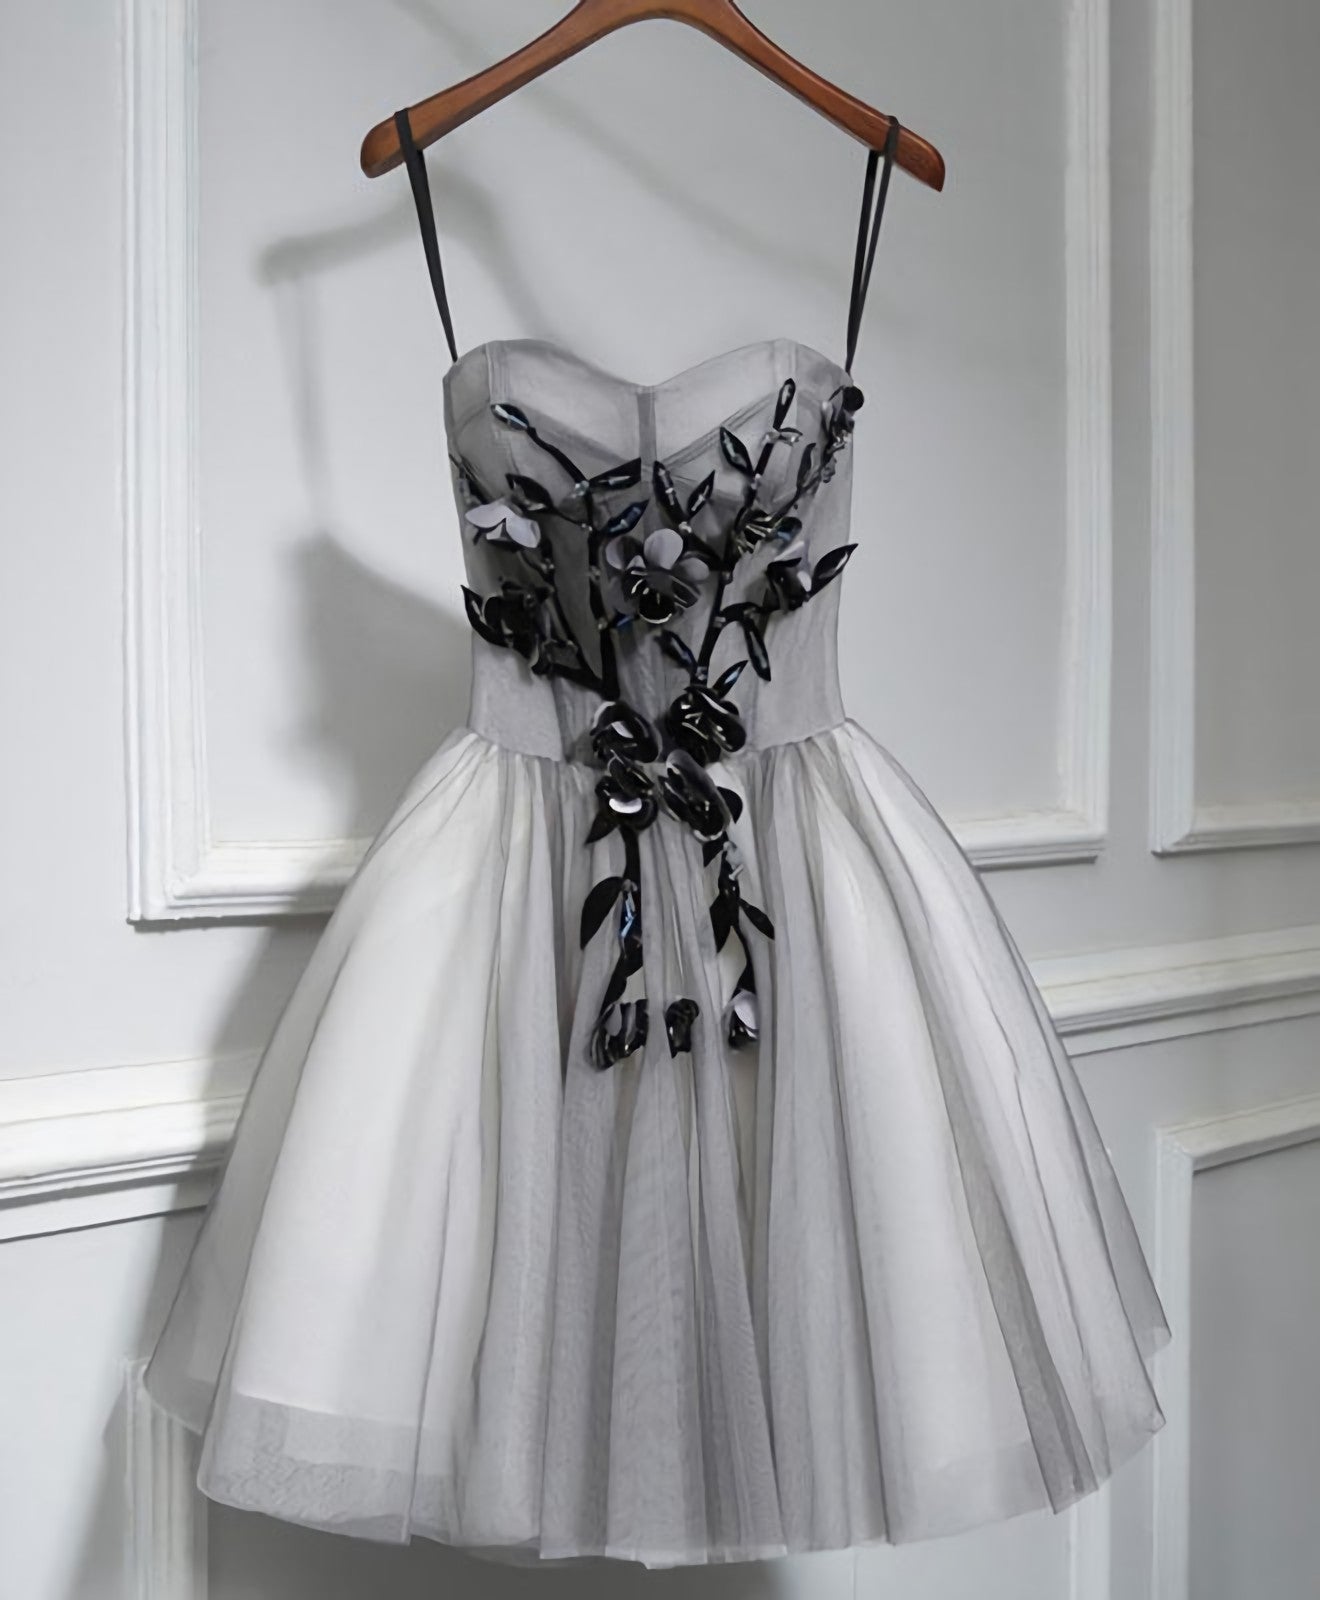 Gray Tulle Short A Line Corset Prom Dress, Corset Homecoming Dress outfit, Evening Dresses Black